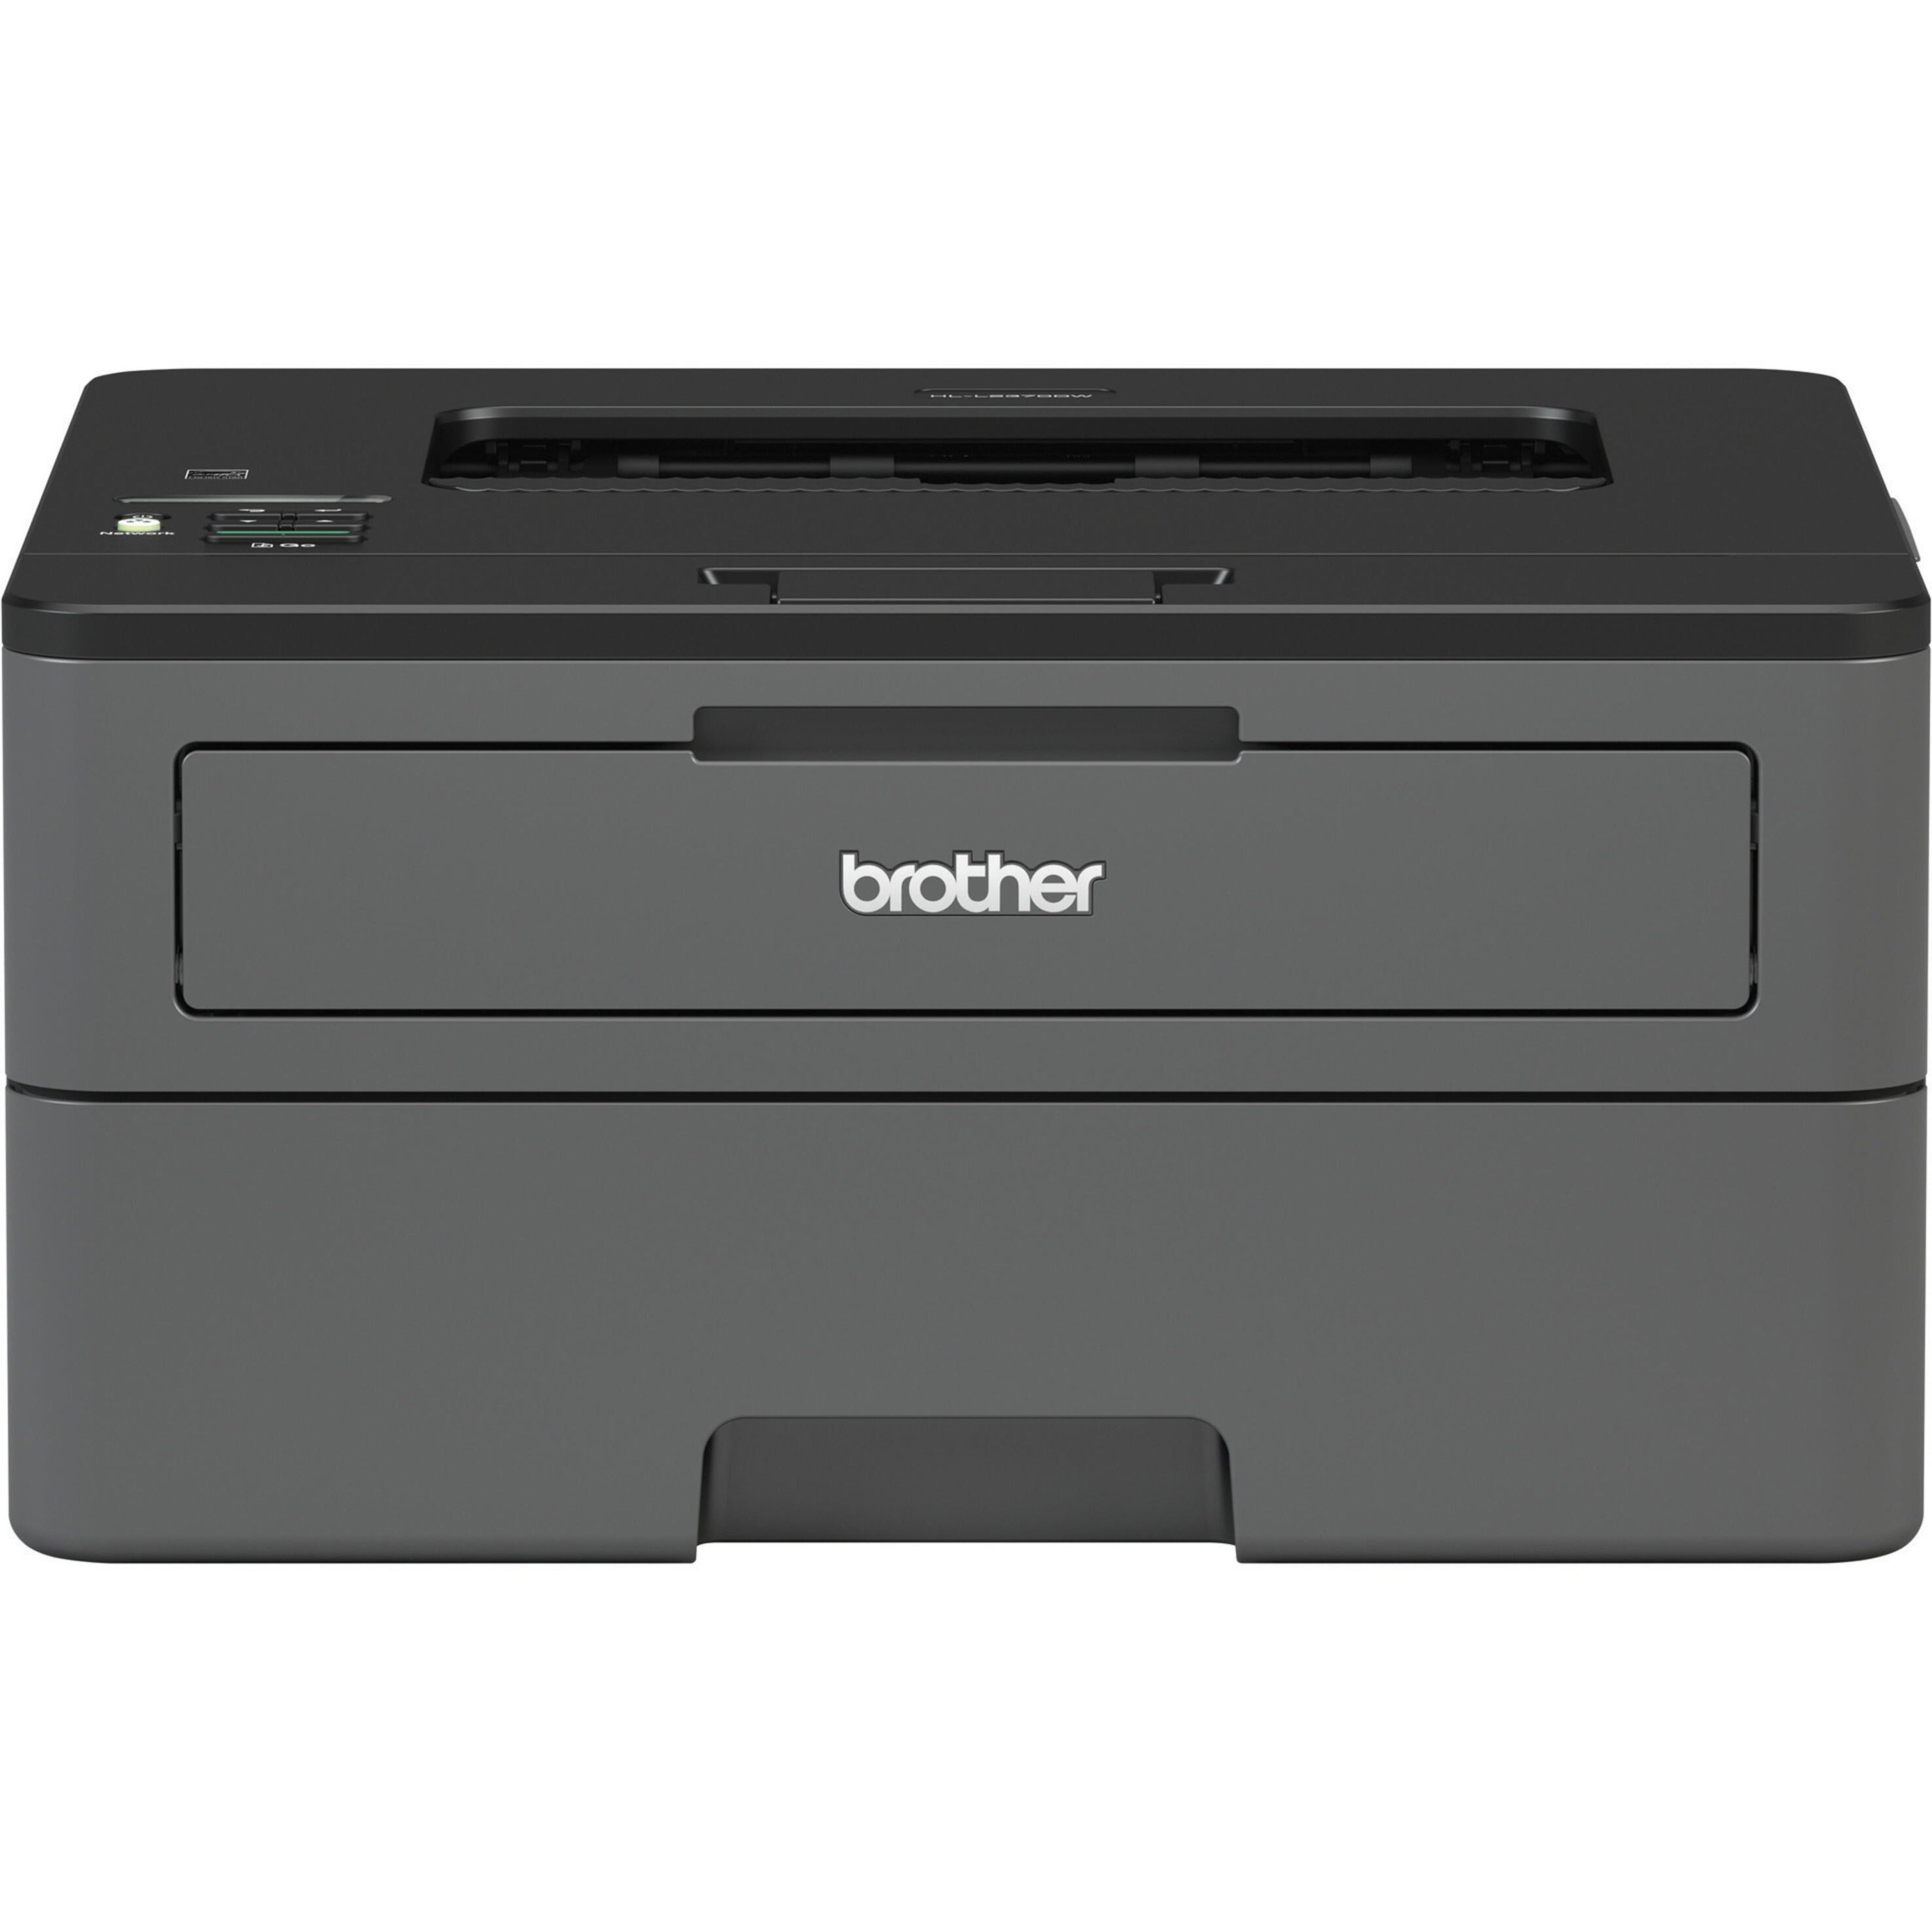 Brother HL-L2370DW Compact Laser Printer with Wireless & Ethernet, Duplex Printing, and 1-Year Limited Warranty